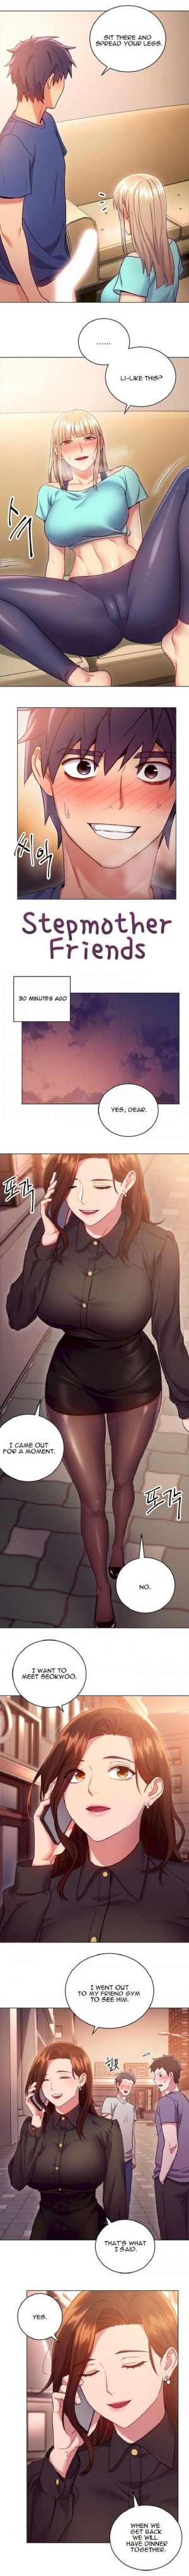  [Neck Pilllow] Stepmother Friends Ch.39/? [English] [Hentai Universe] NEW! 13/10/2020  - Page 171